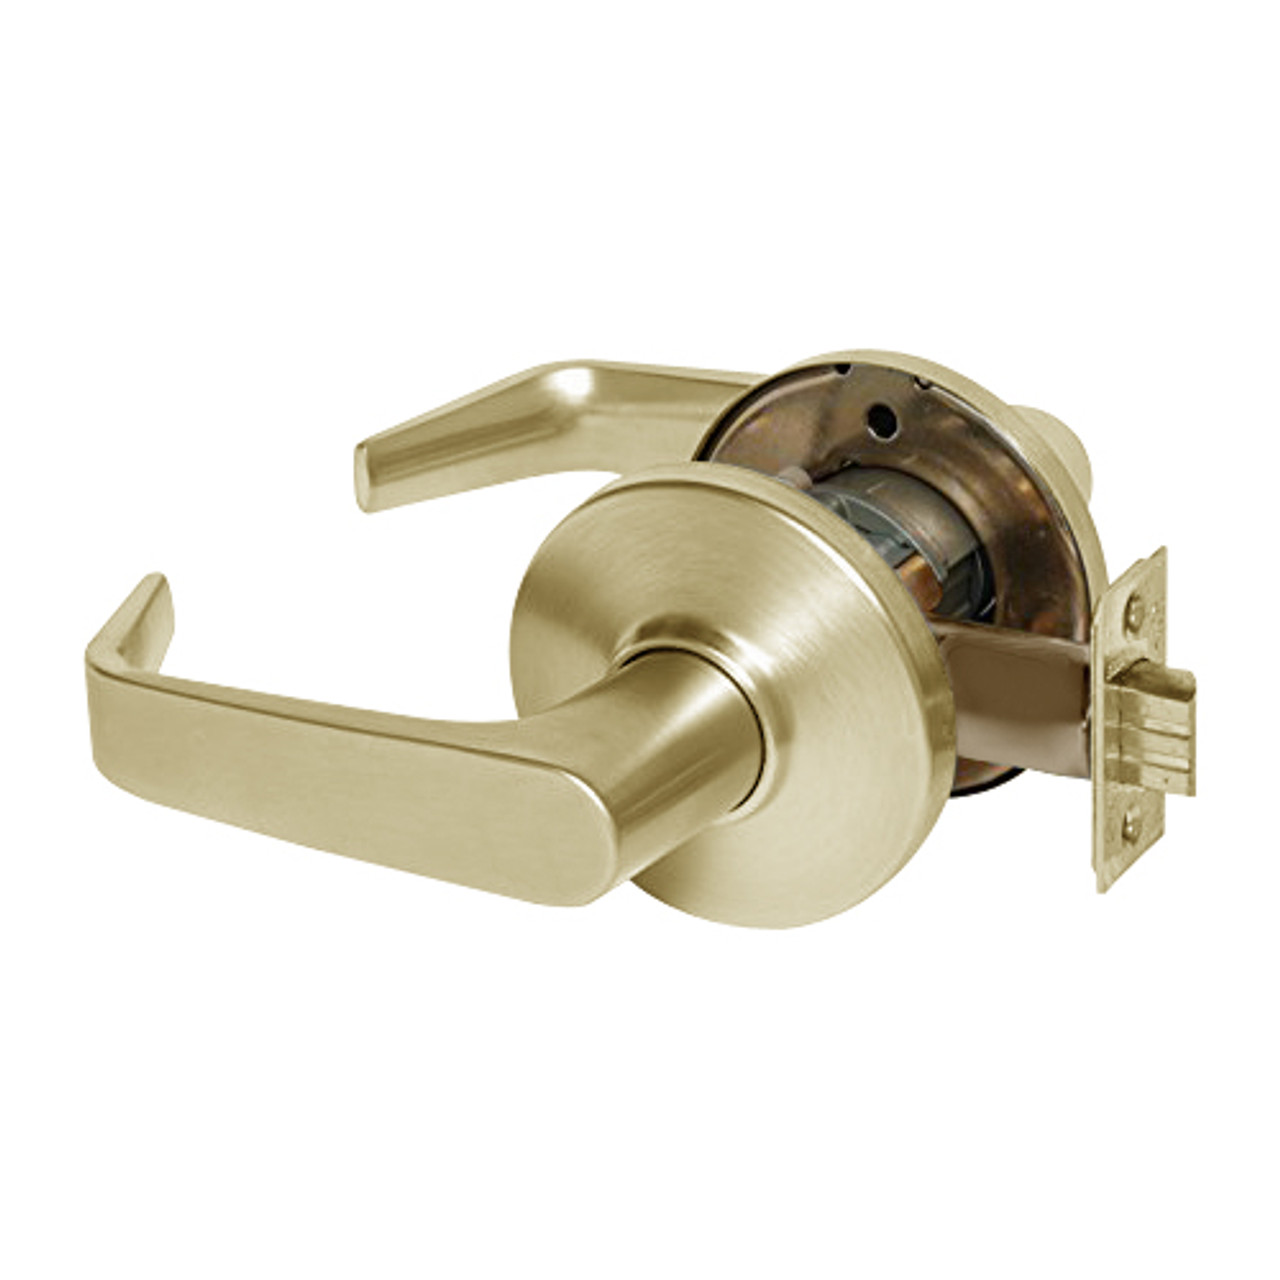 9K30NX15DS3606 Best 9K Series Passage Heavy Duty Cylindrical Lever Locks with Contour Angle with Return Lever Design in Satin Brass